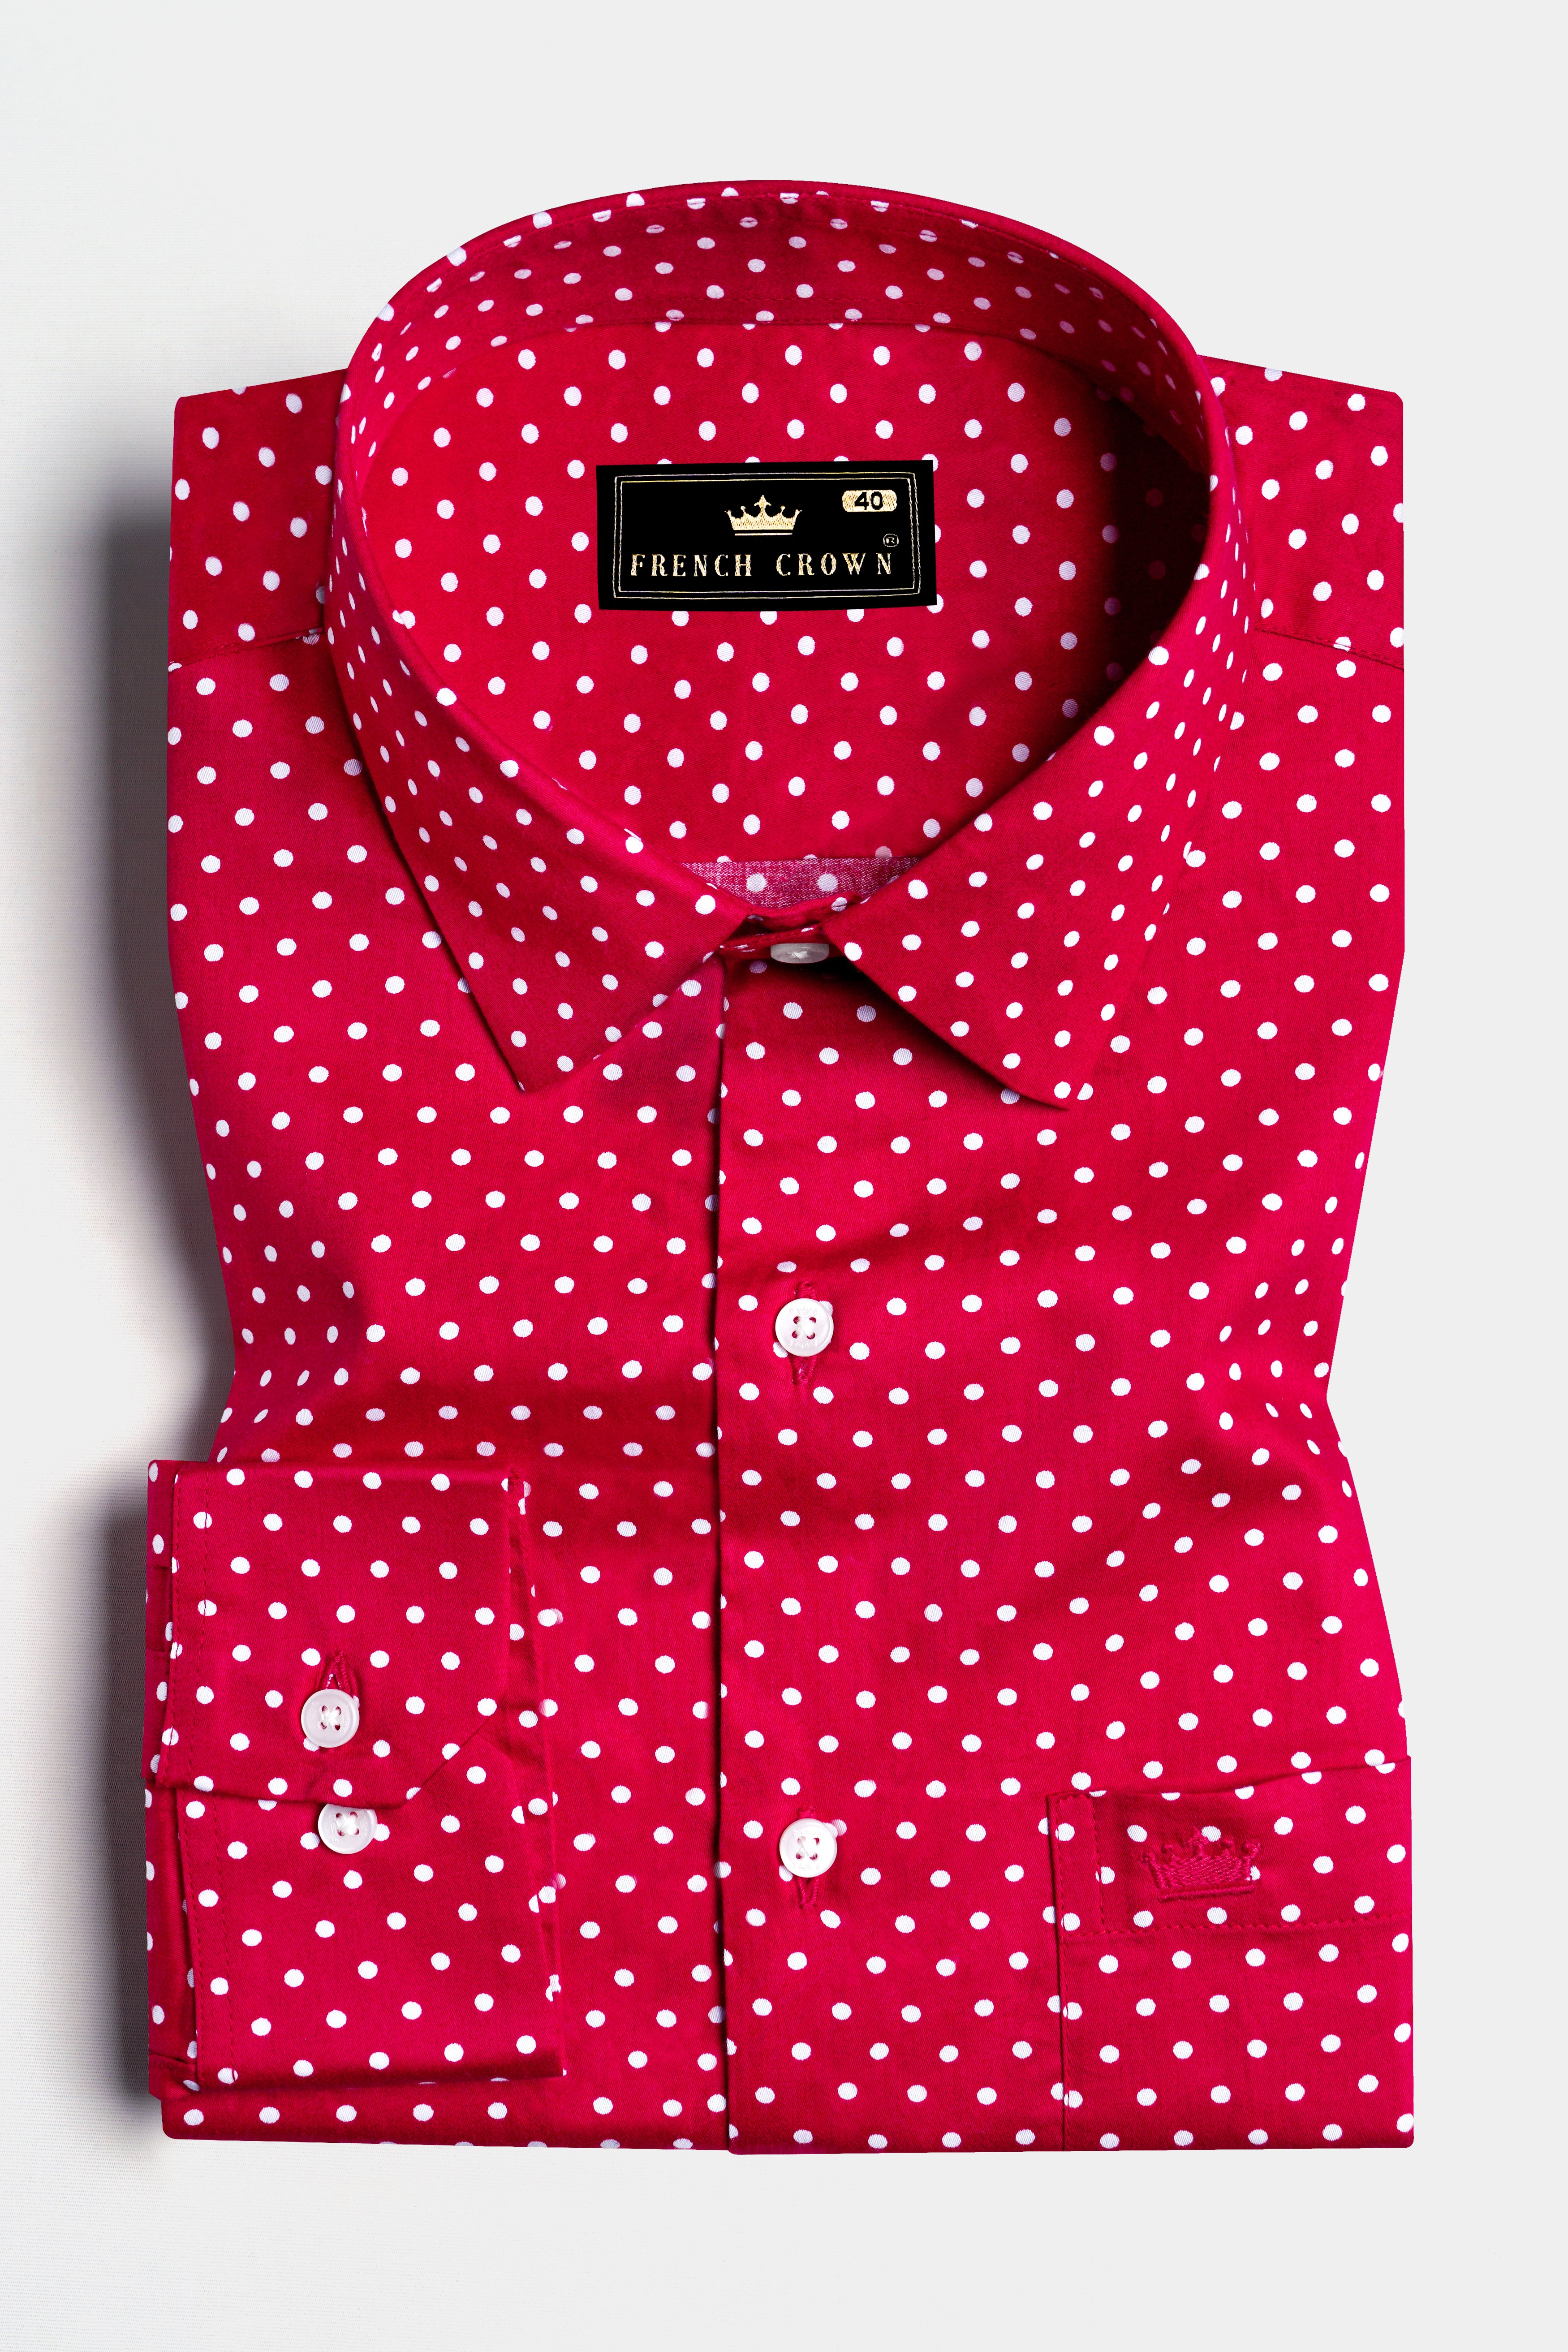 Scarlet Red and White Polka Dotted Premium Cotton Shirt